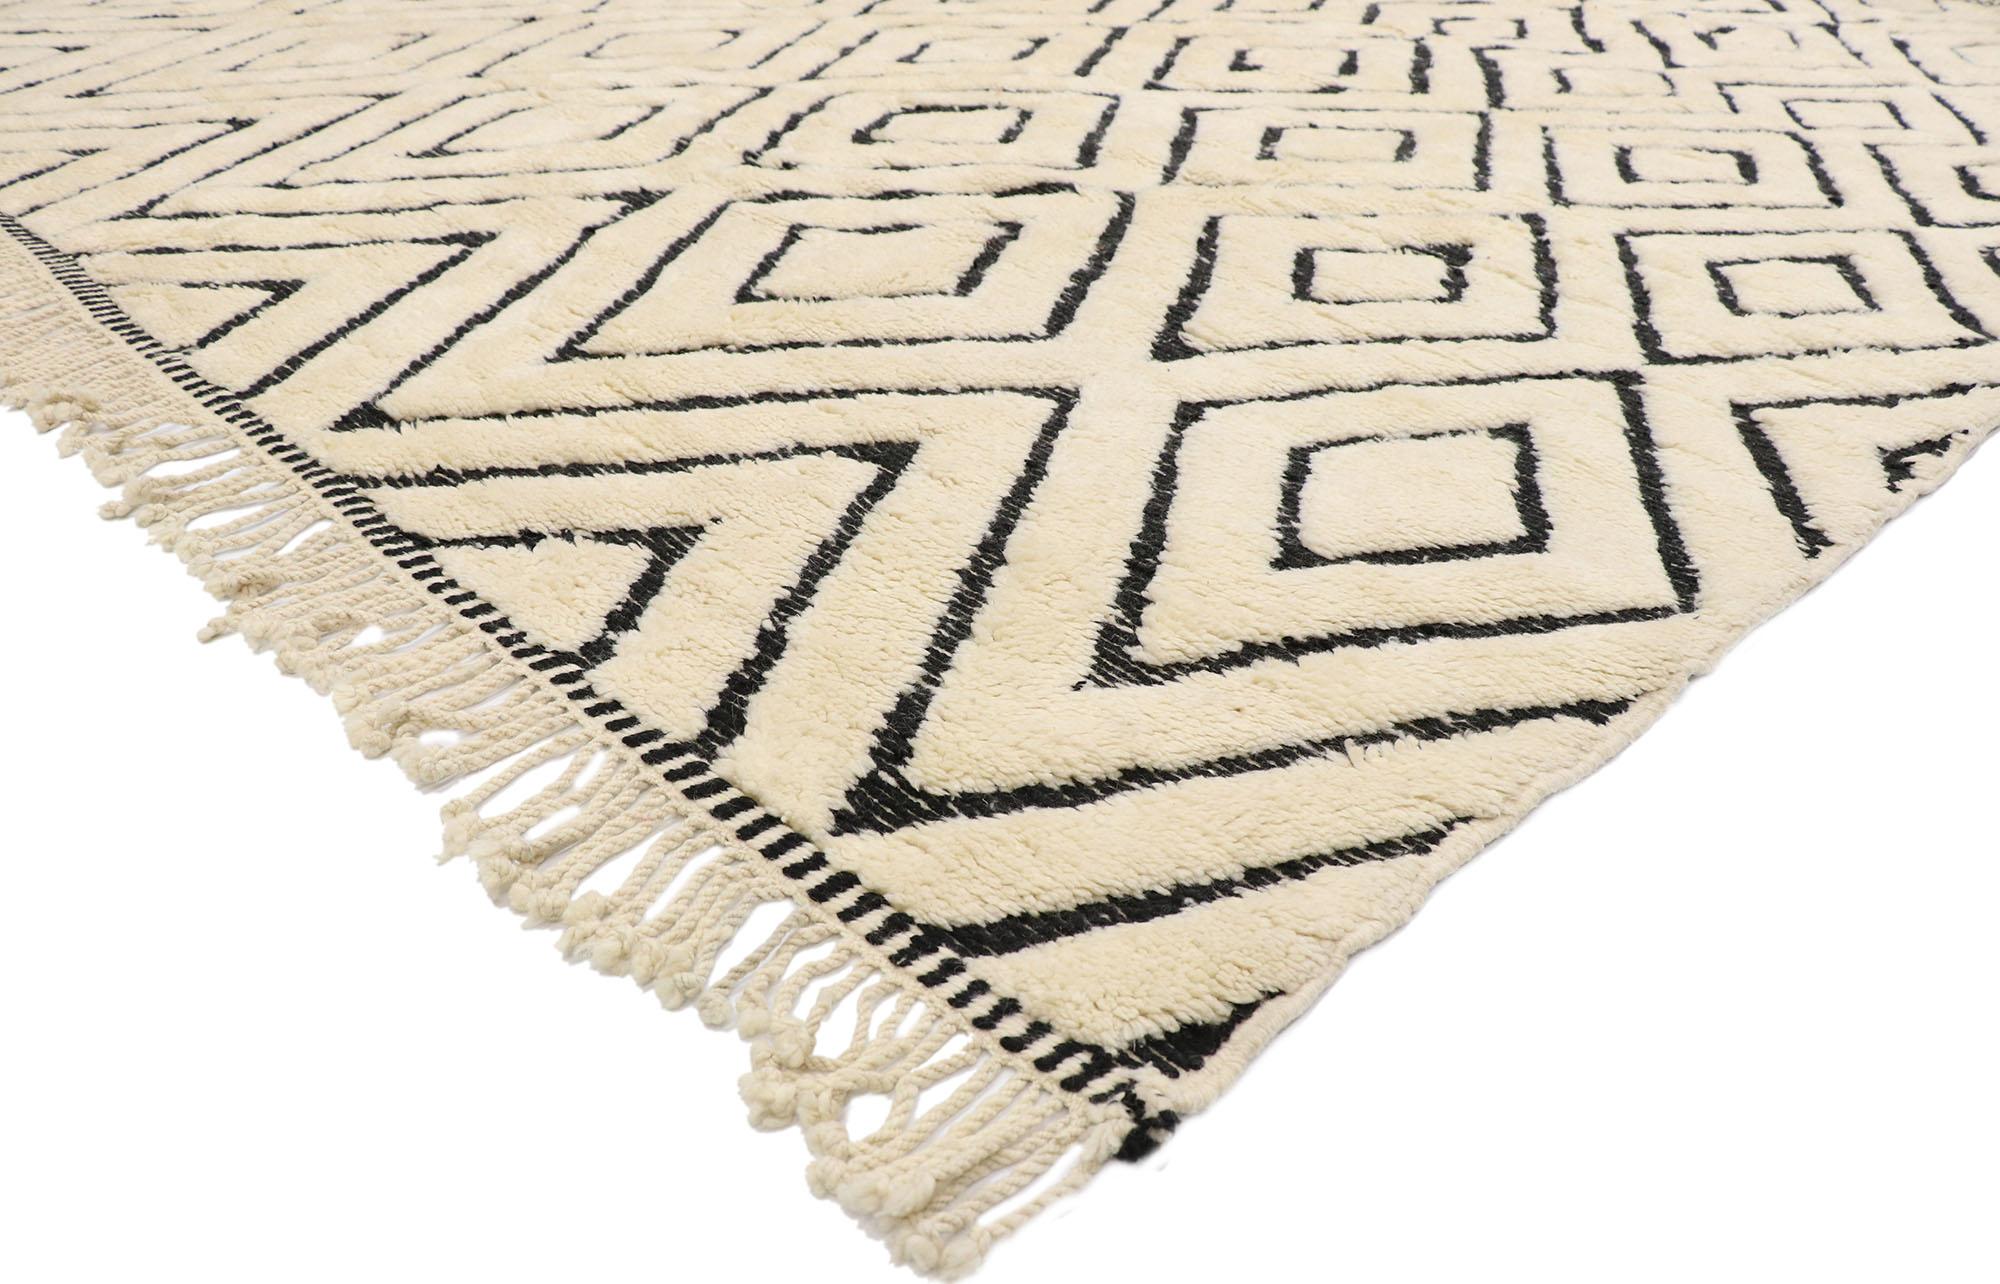 21158 new Contemporary Berber Moroccan rug with Modernist style 10'00 x 12'06. With its simplicity, plush pile and modernist style, this hand knotted wool contemporary Berber Moroccan rug is a captivating vision of woven beauty. It features carved